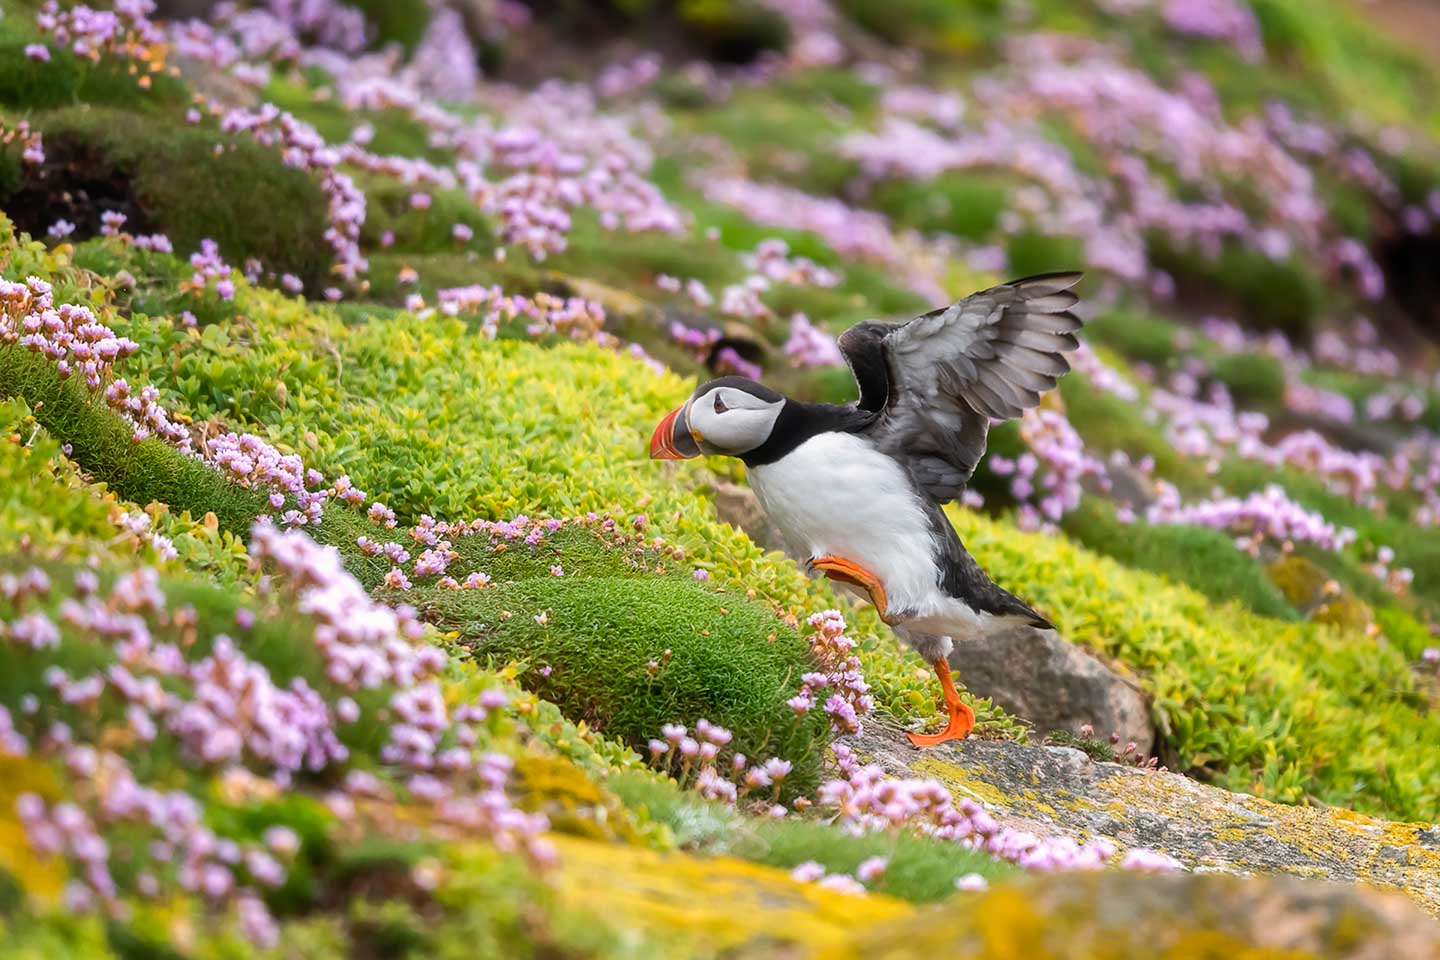 CJPOTY round 3 (March 2023) shortlisted image - puffin and sea pinks